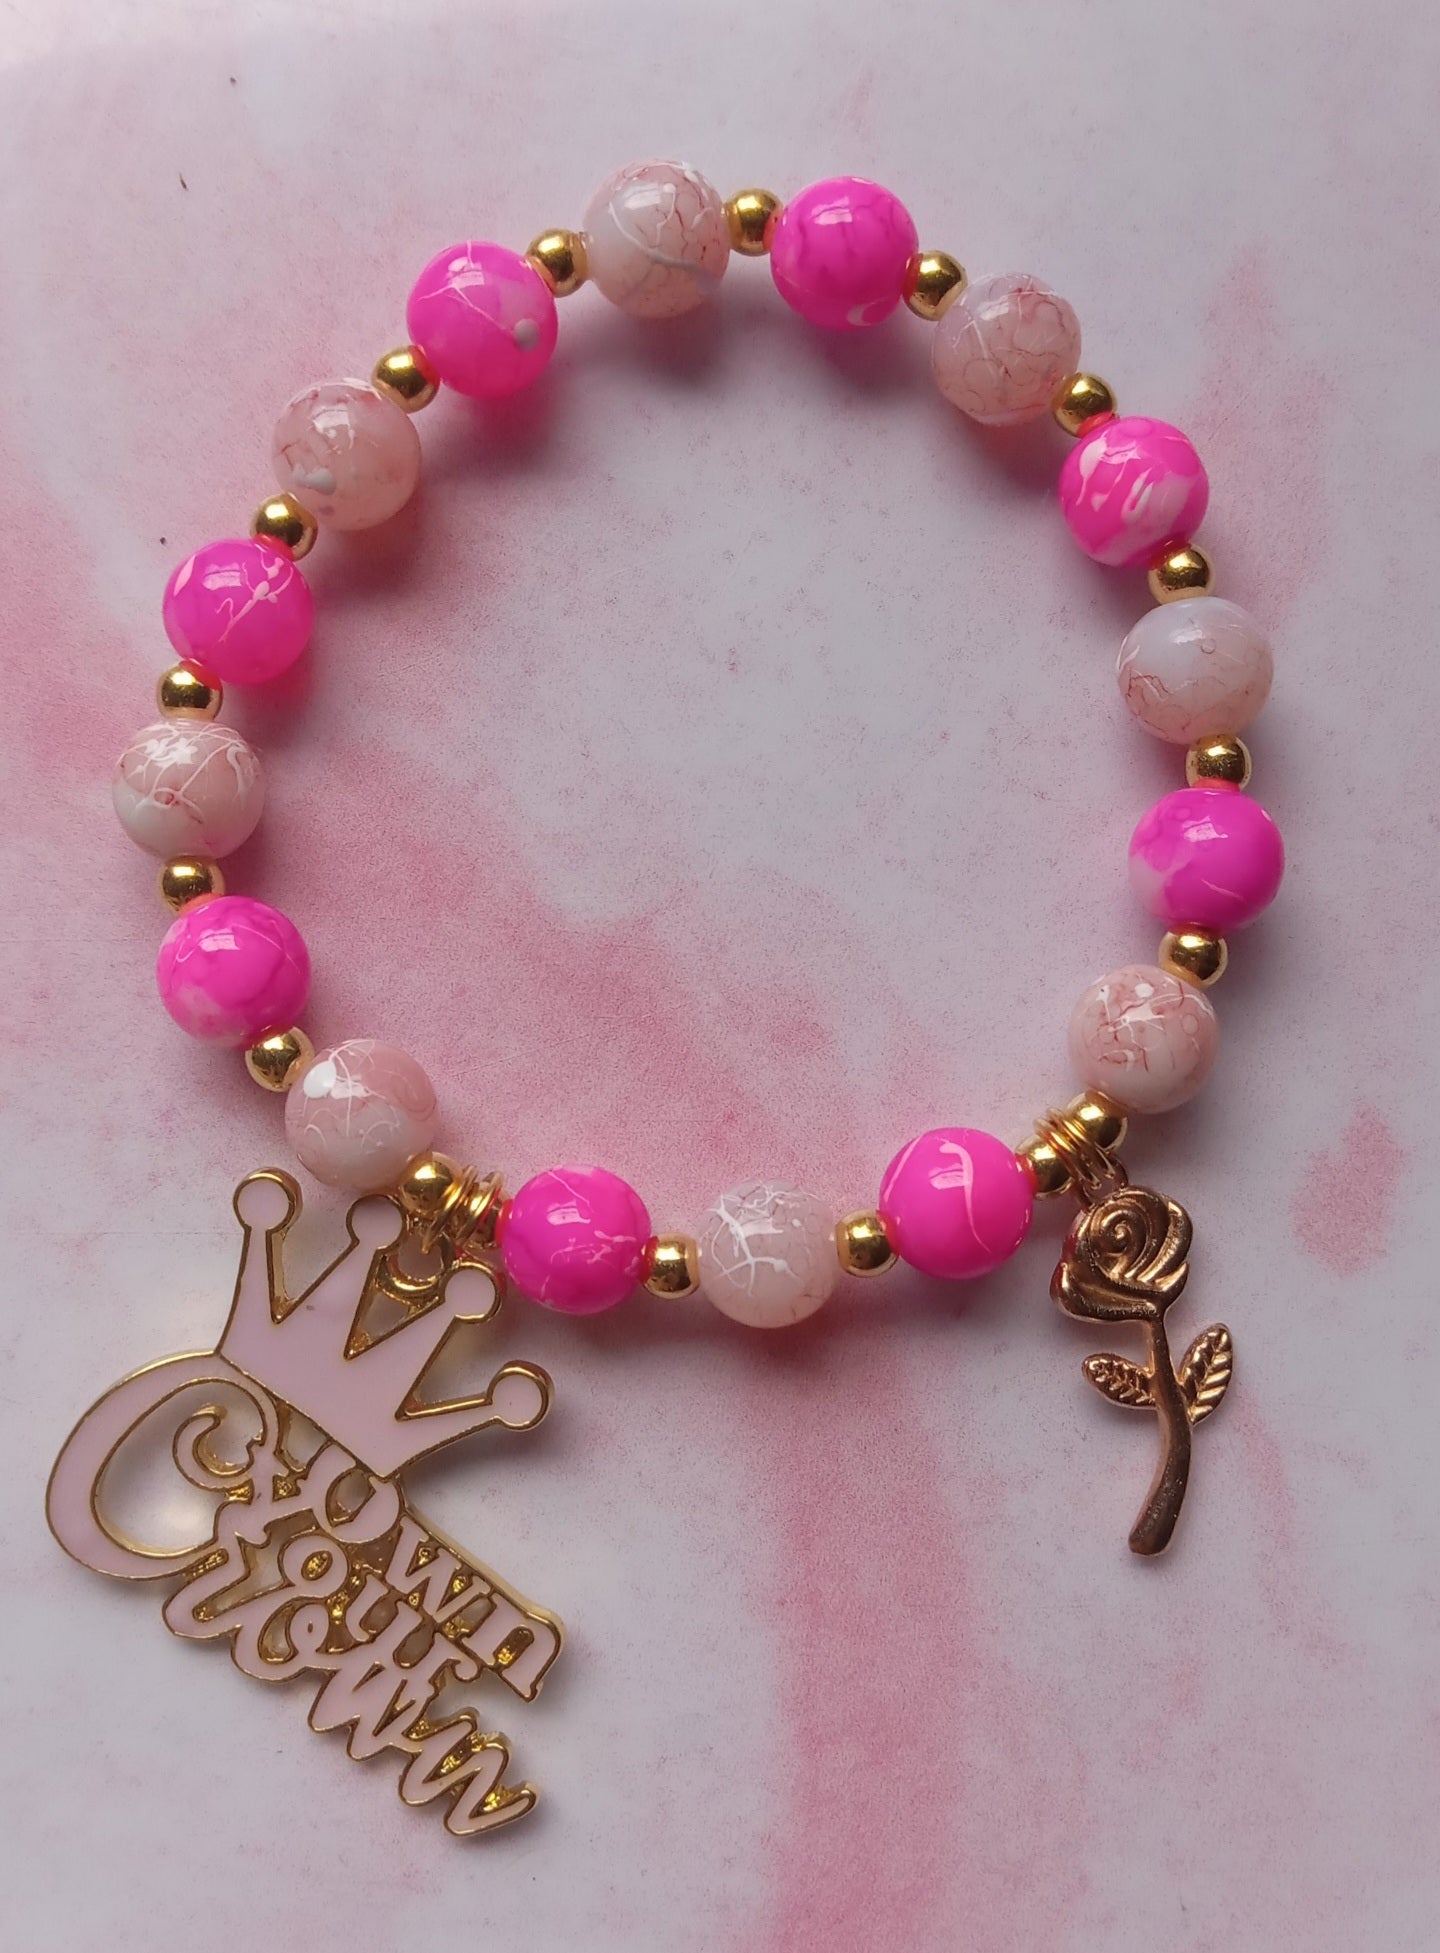 Own Your Crown Beaded Charm Bracelet